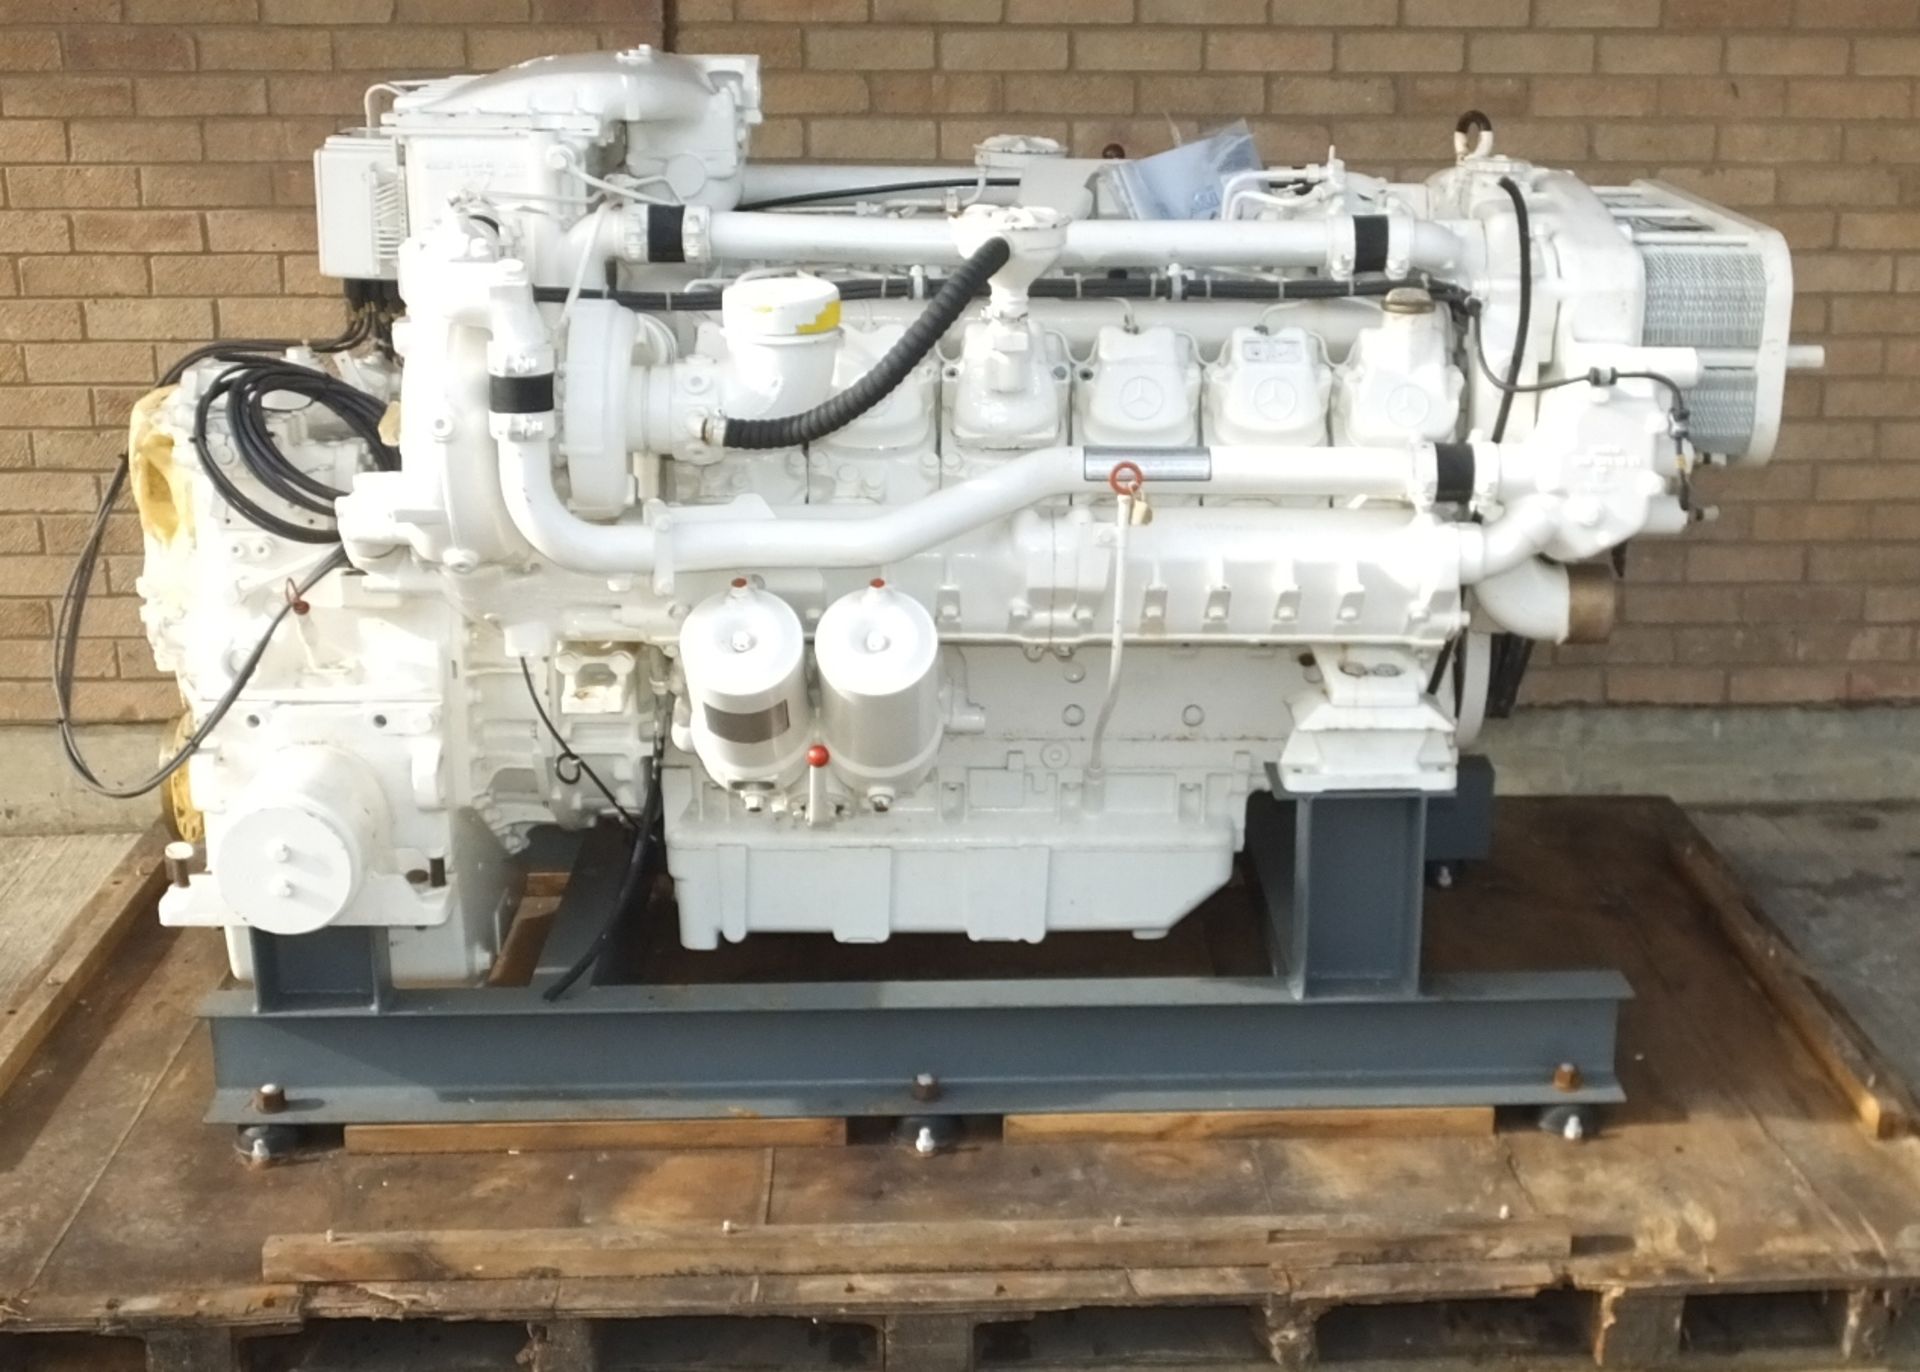 MTU 12V 183 engine - 610kW - 1310HP - 2100 RPM - looks to have only done test hours - very clean - Image 10 of 37